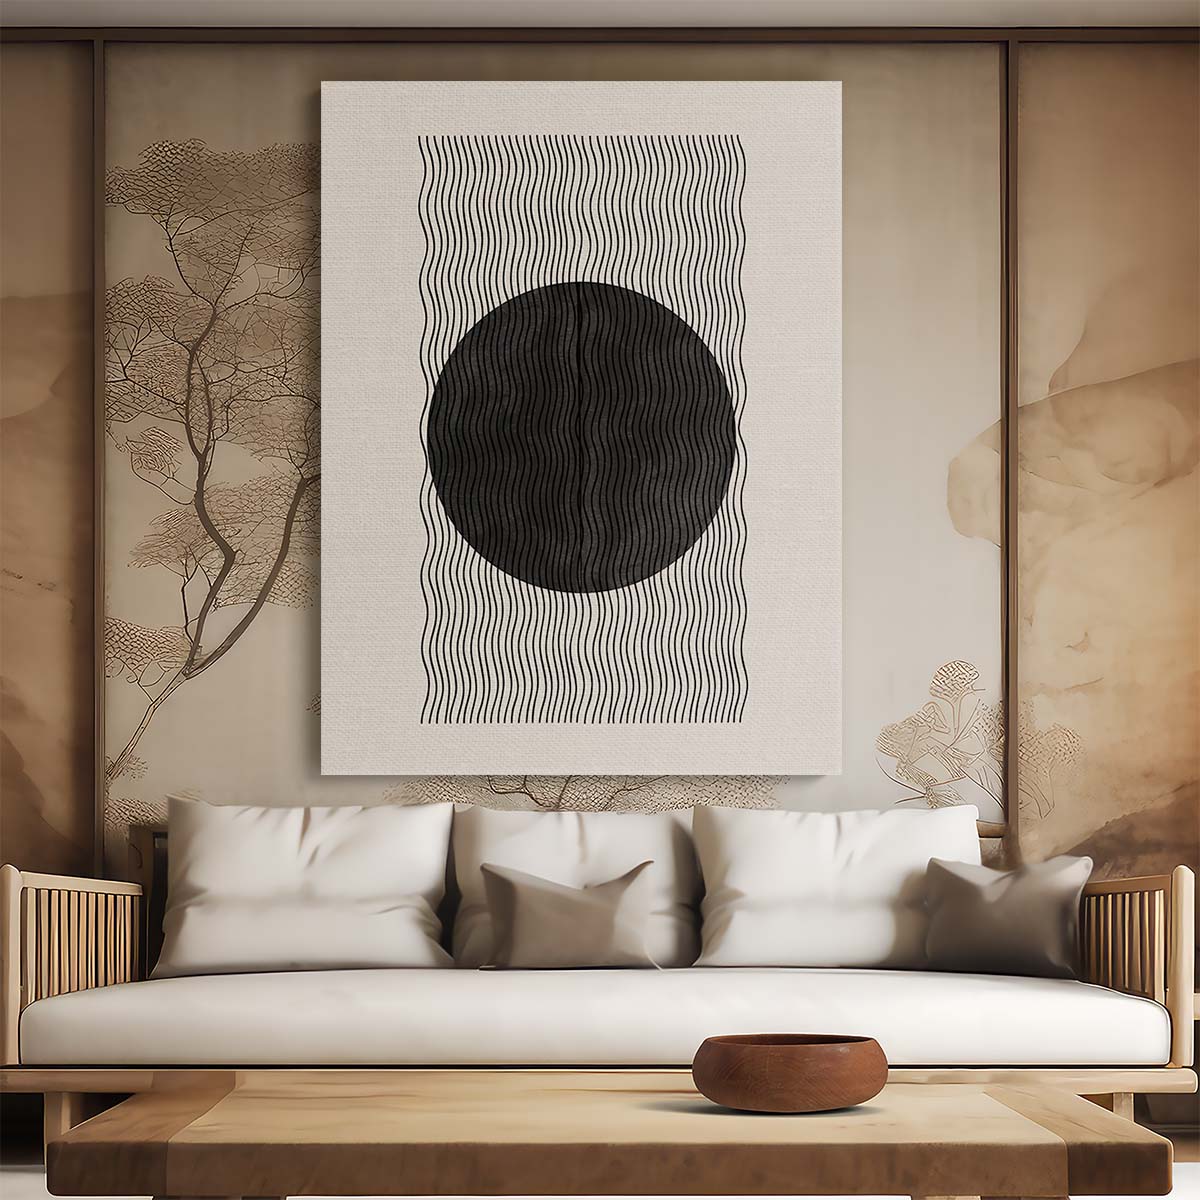 Abstract Geometric Illustration Artwork, BaB No2. by THE MIUUS STUDIO by Luxuriance Designs, made in USA